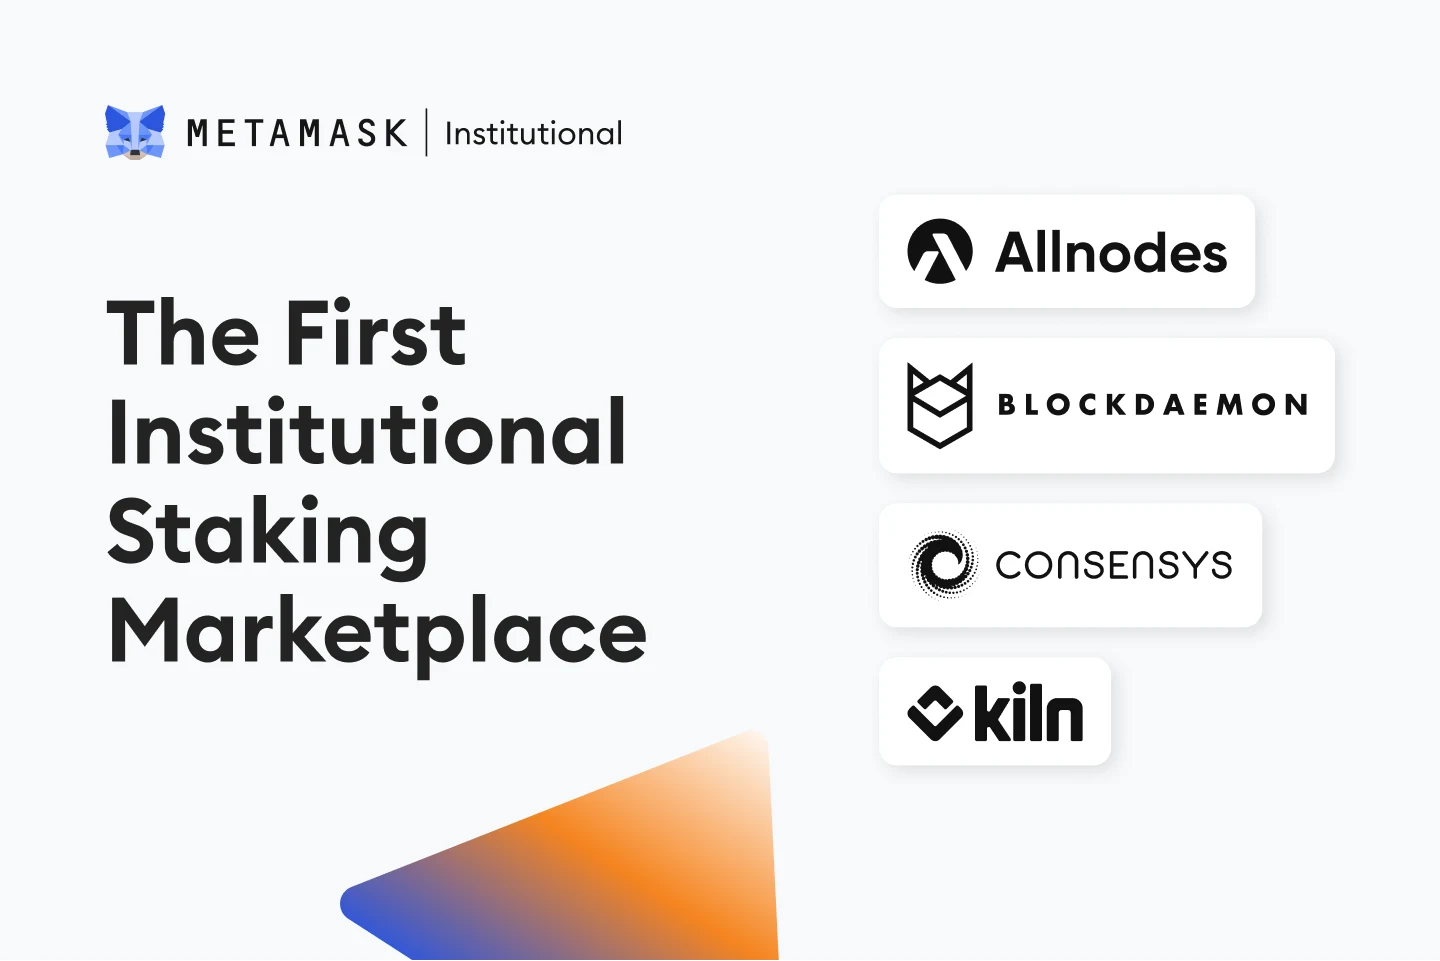 Image: Consensys Launches the First Marketplace for Institutional Staking on MetaMask Institutional, in Partnership with Allnodes, Blockdaemon, and Kiln